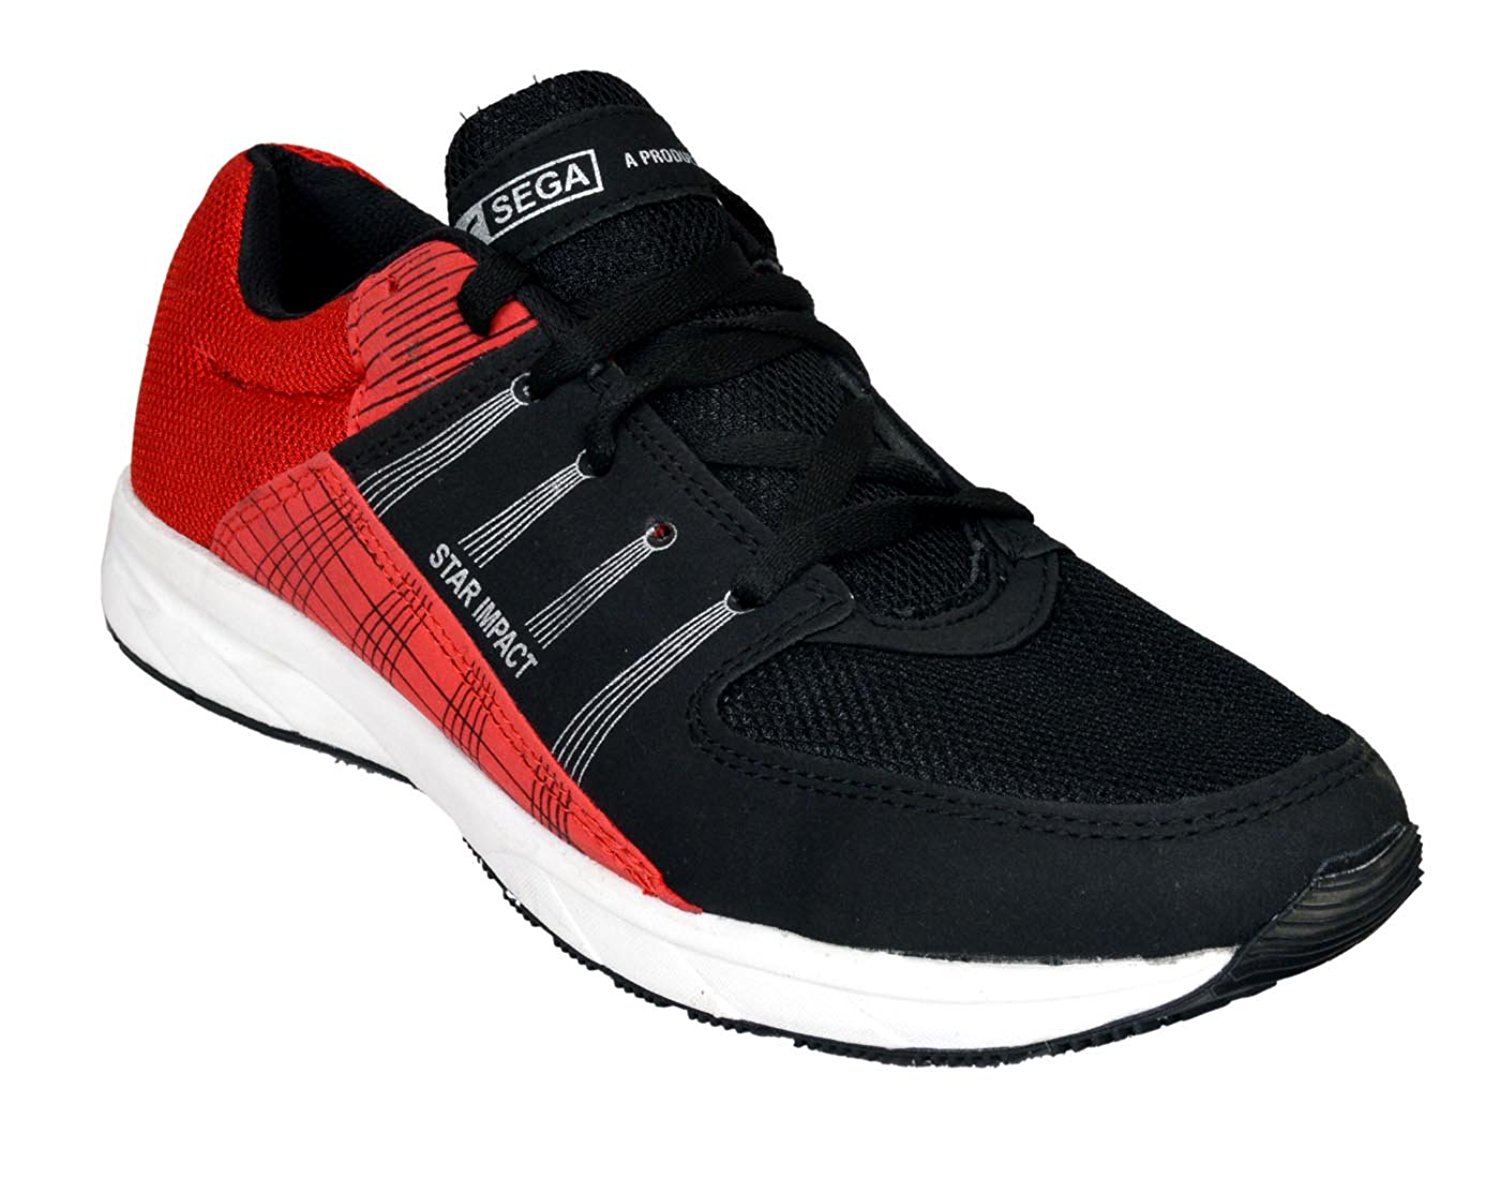 Buy SEGA Techno Red/Black Running Shoes Online @ ₹1199 from ShopClues